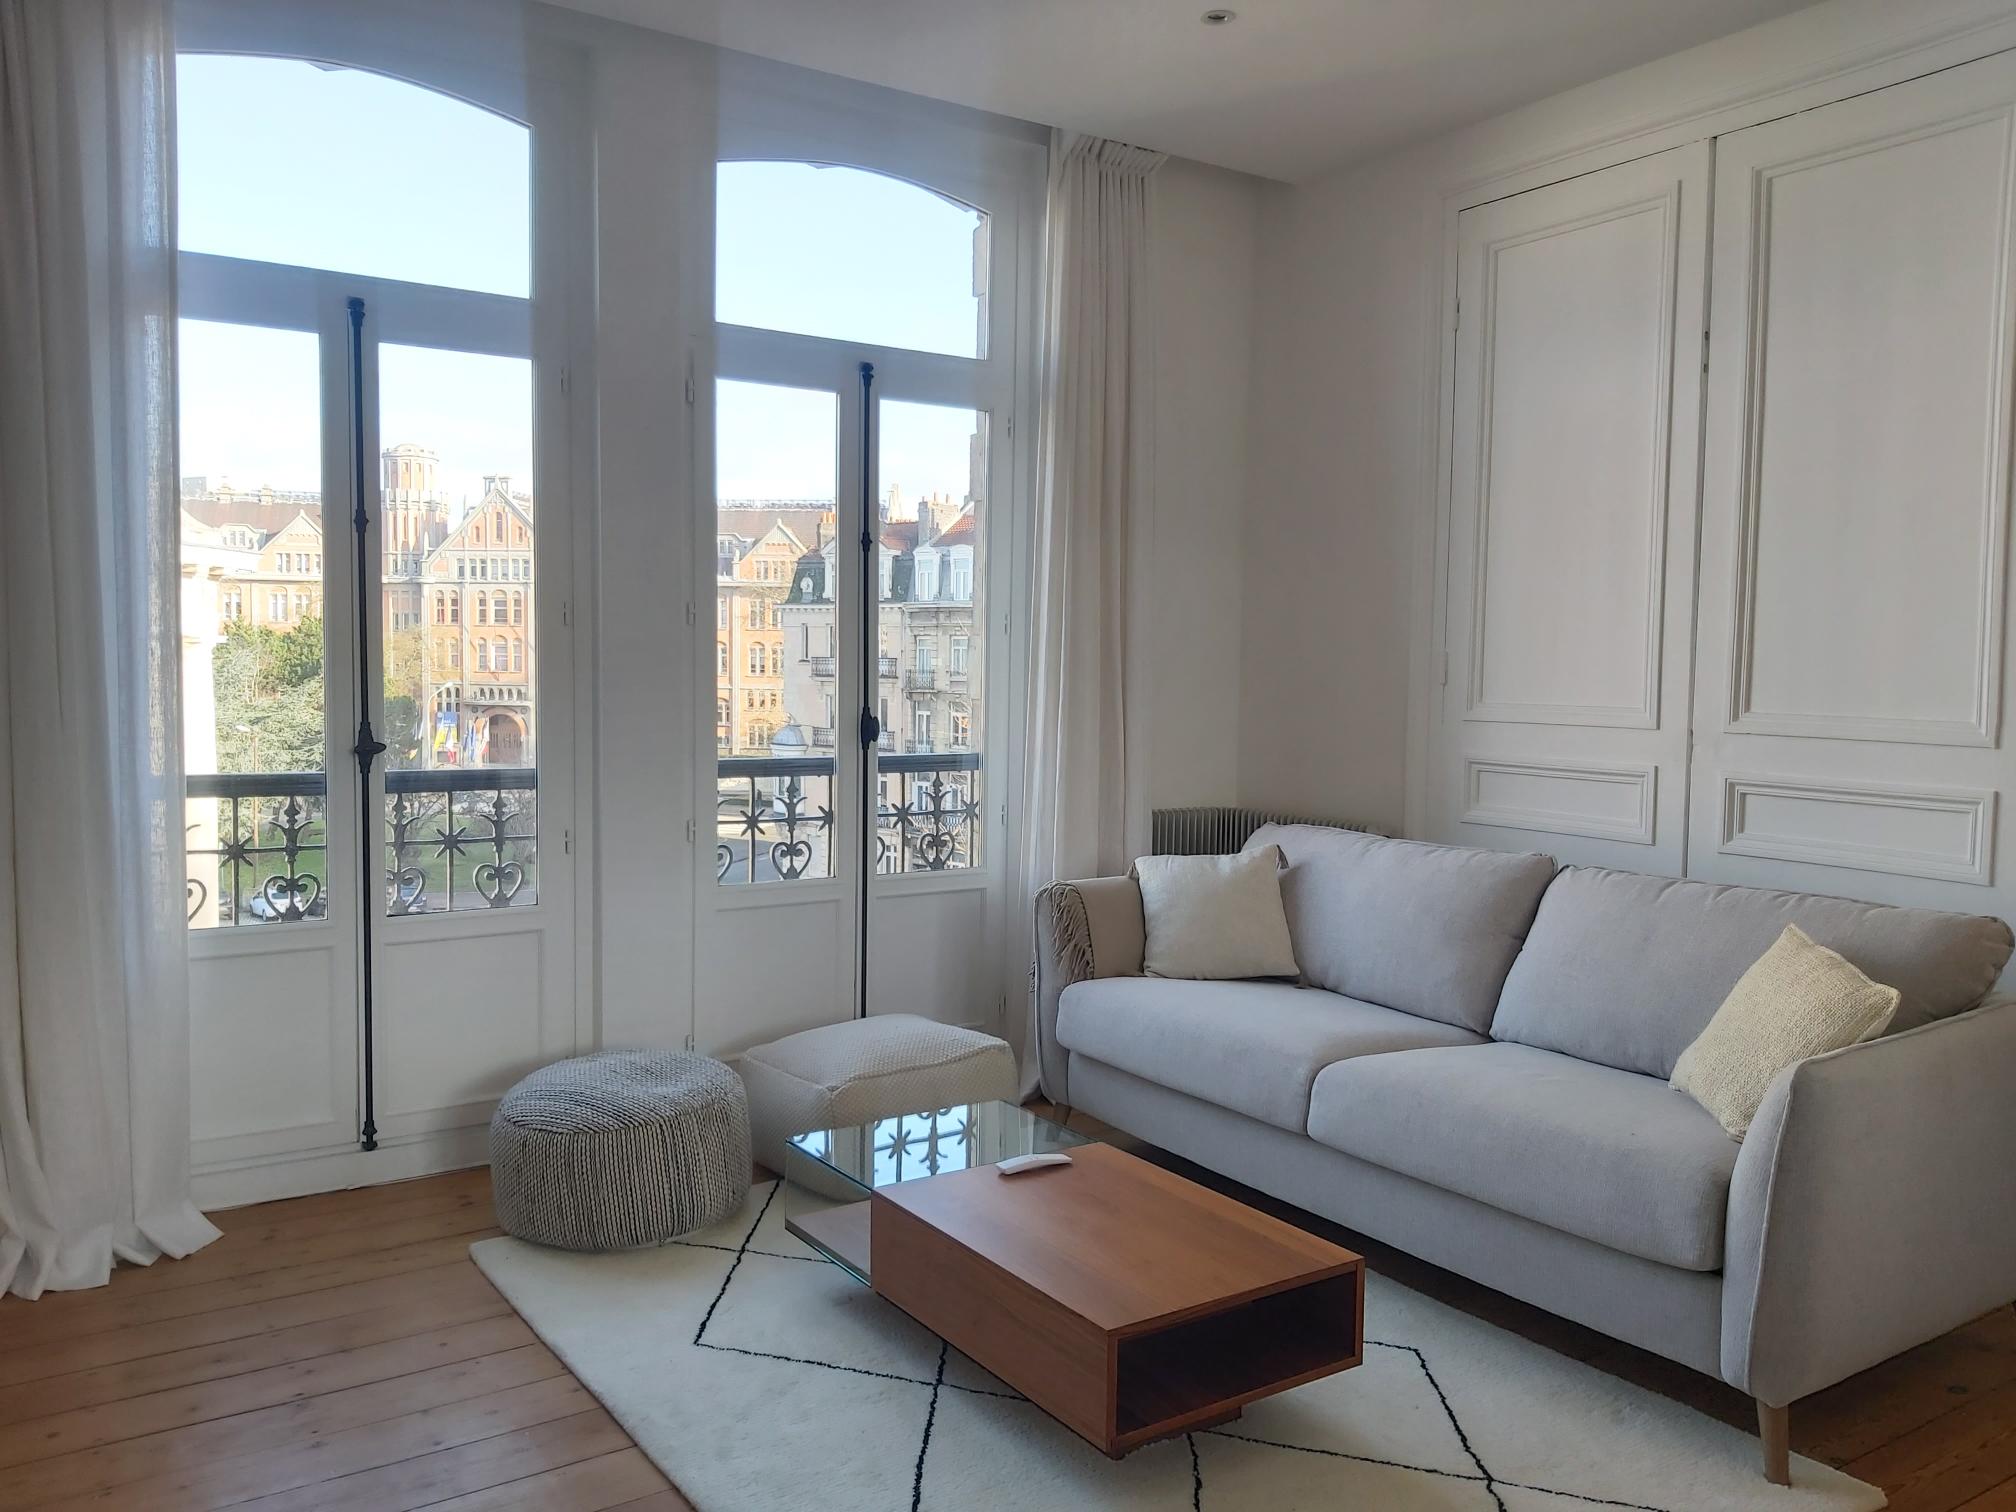 Interior shot of a stylish living room in an old apartment in Little. Balcony doors offer a glimpse of the historic city centre outside.